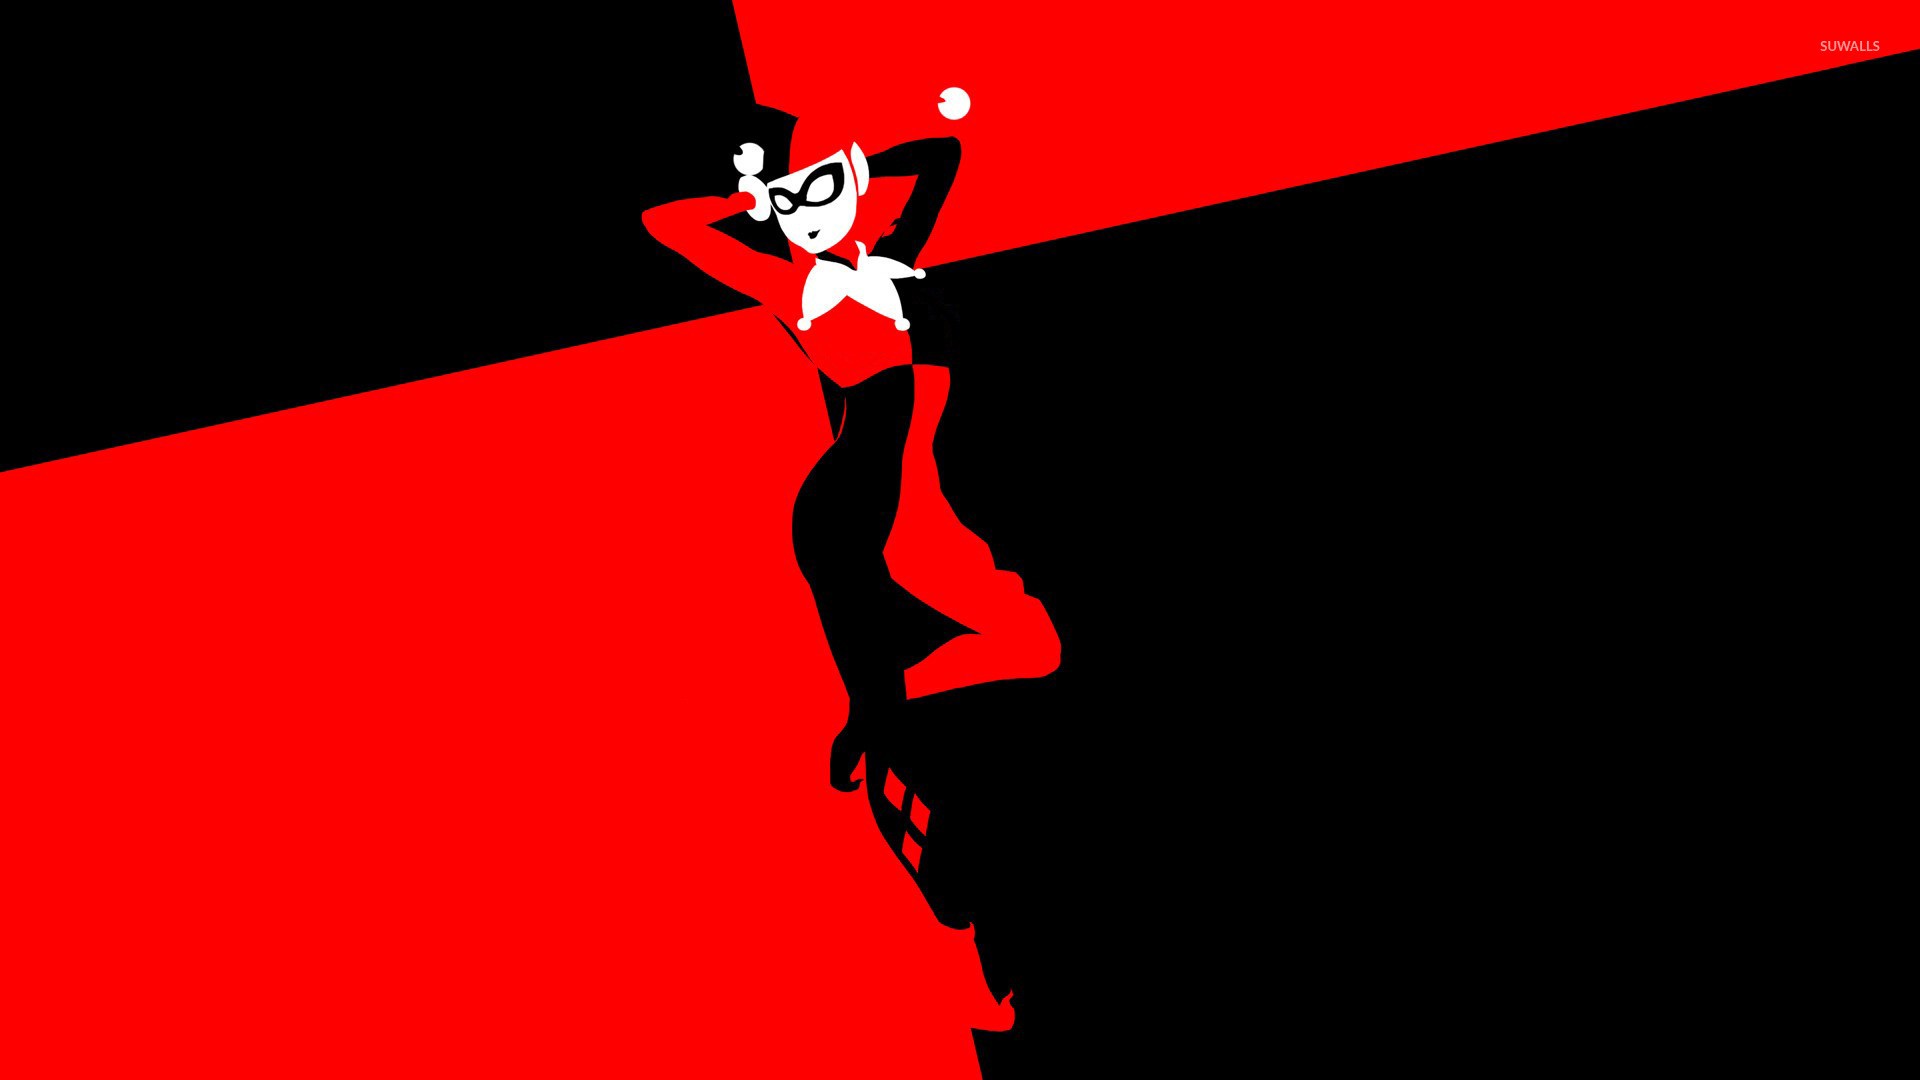 Wallpaper Harley Quinn Movie Desktop with resolution 1920X1080 pixel. You can use this wallpaper as background for your desktop Computer Screensavers, Android or iPhone smartphones